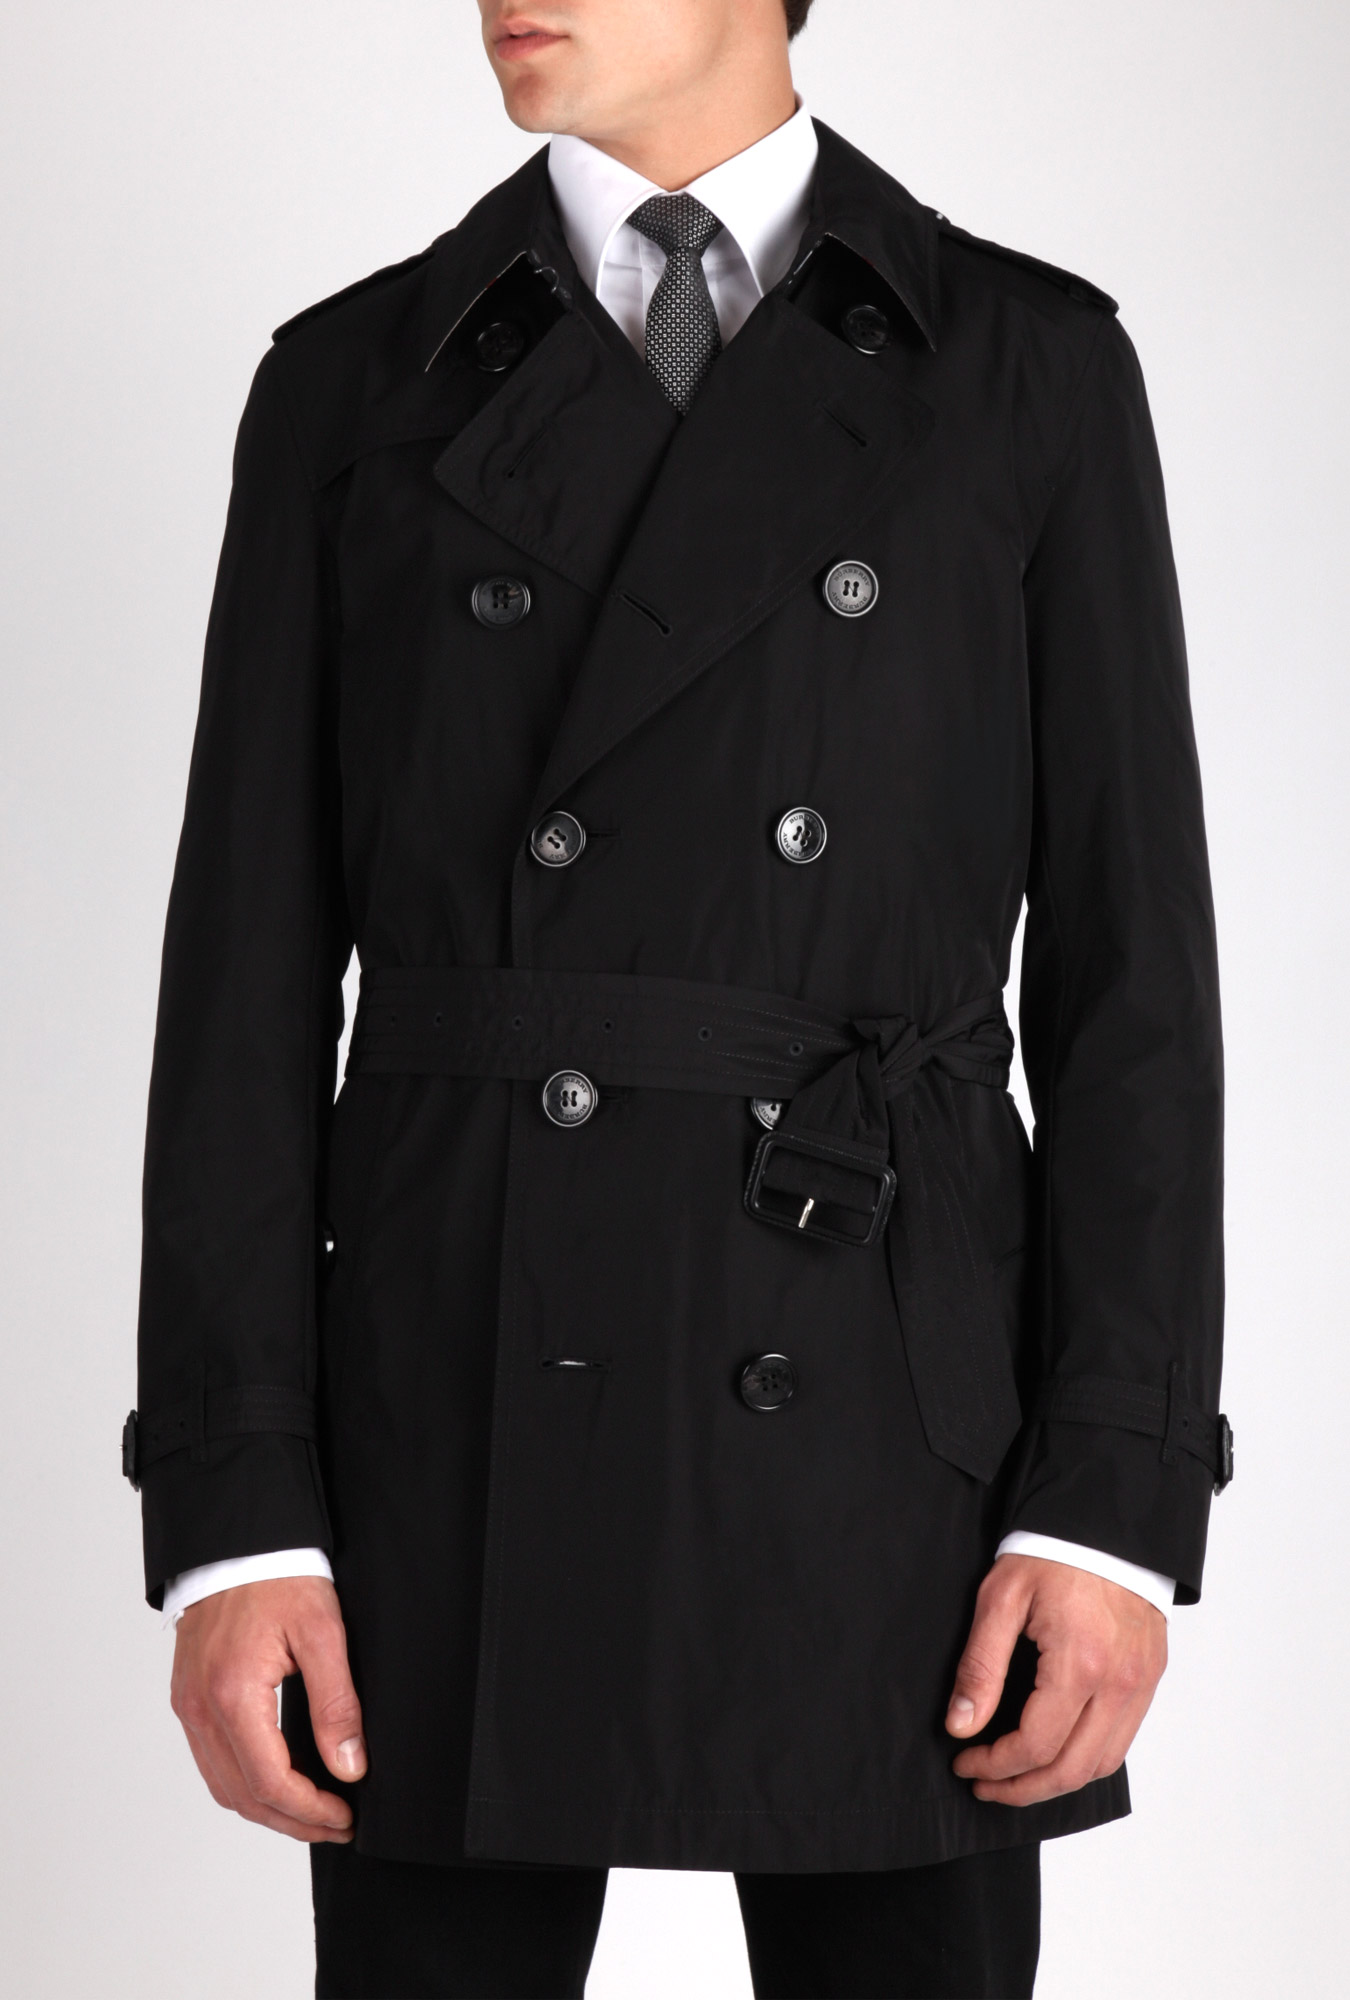 Burberry Black Packable Trench Coat in Black for Men | Lyst